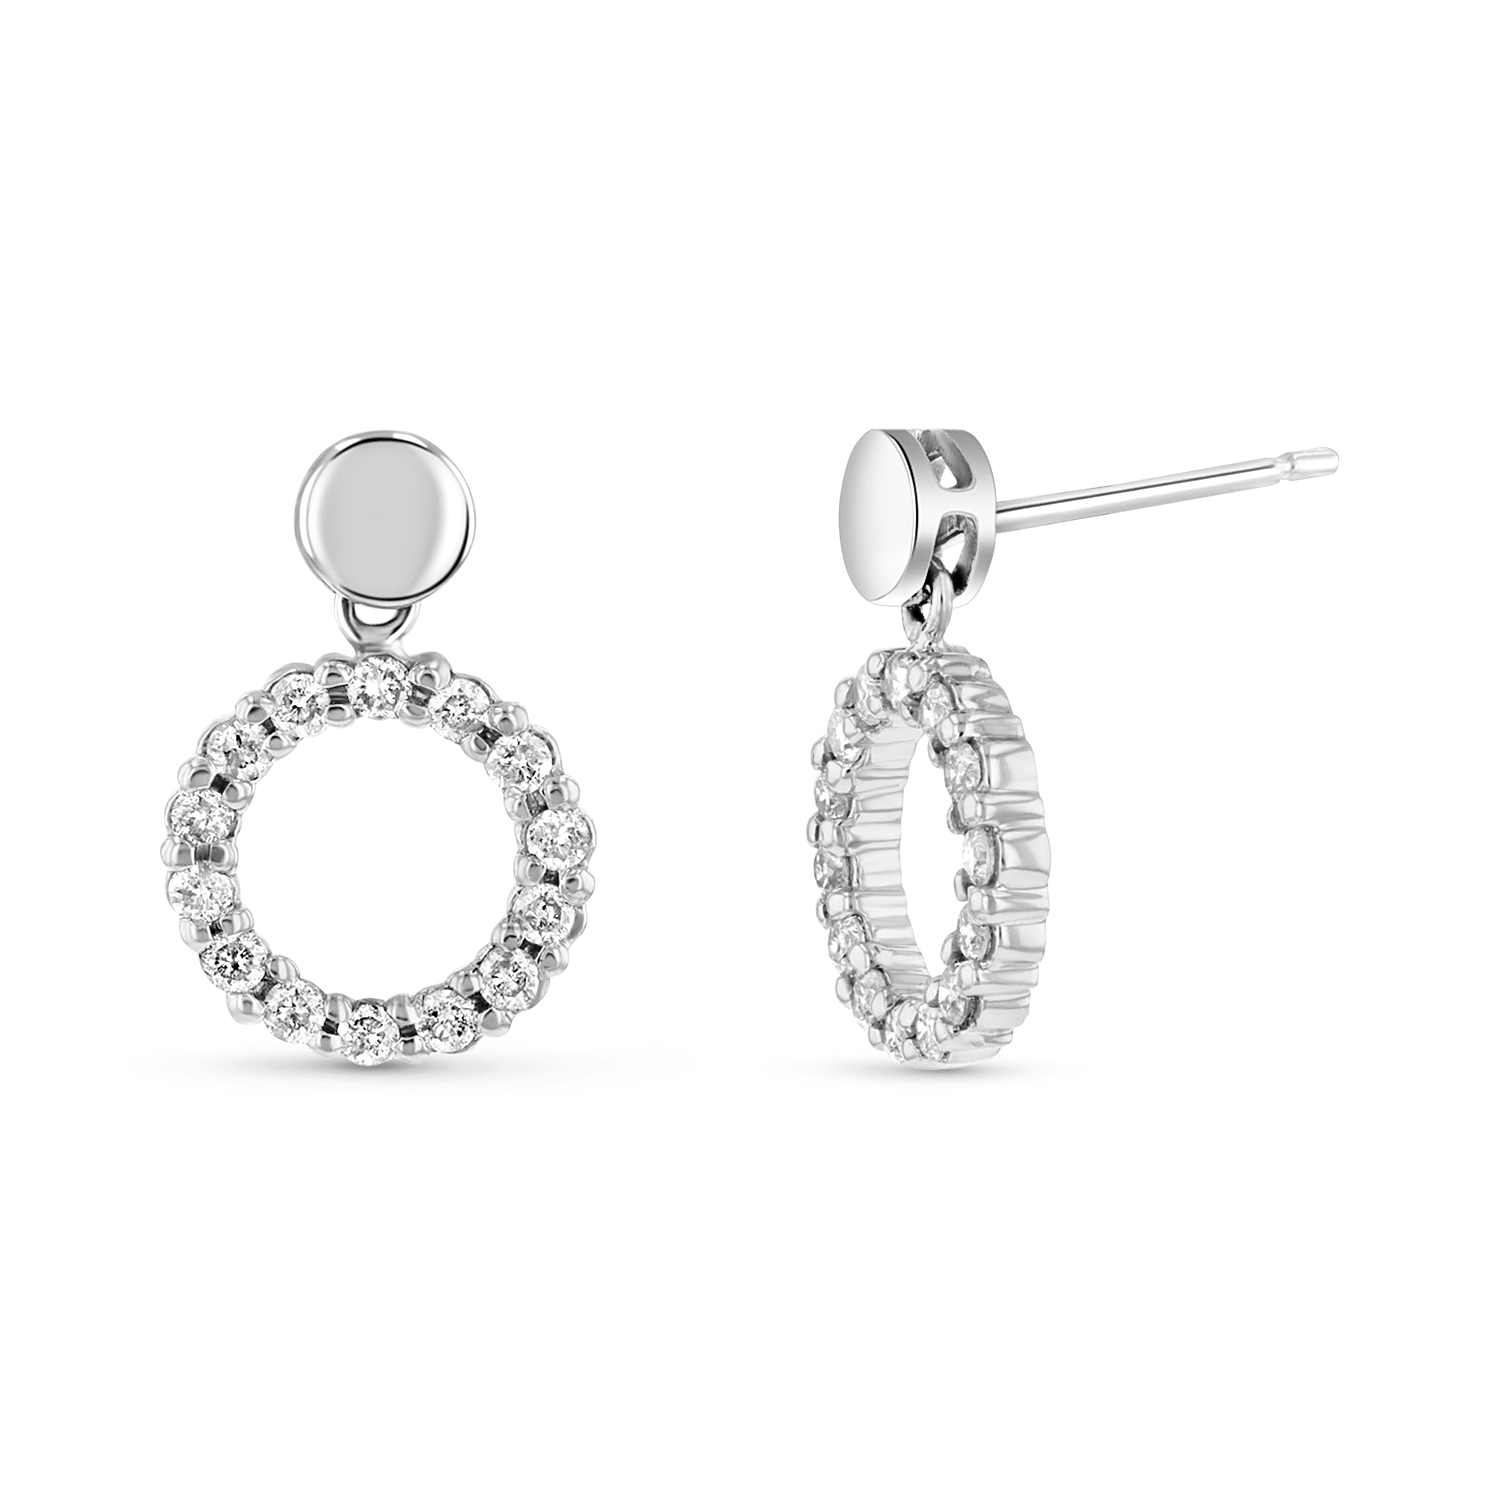 View 14k Gold Earrings with 0.50ct tw of Round Diamond